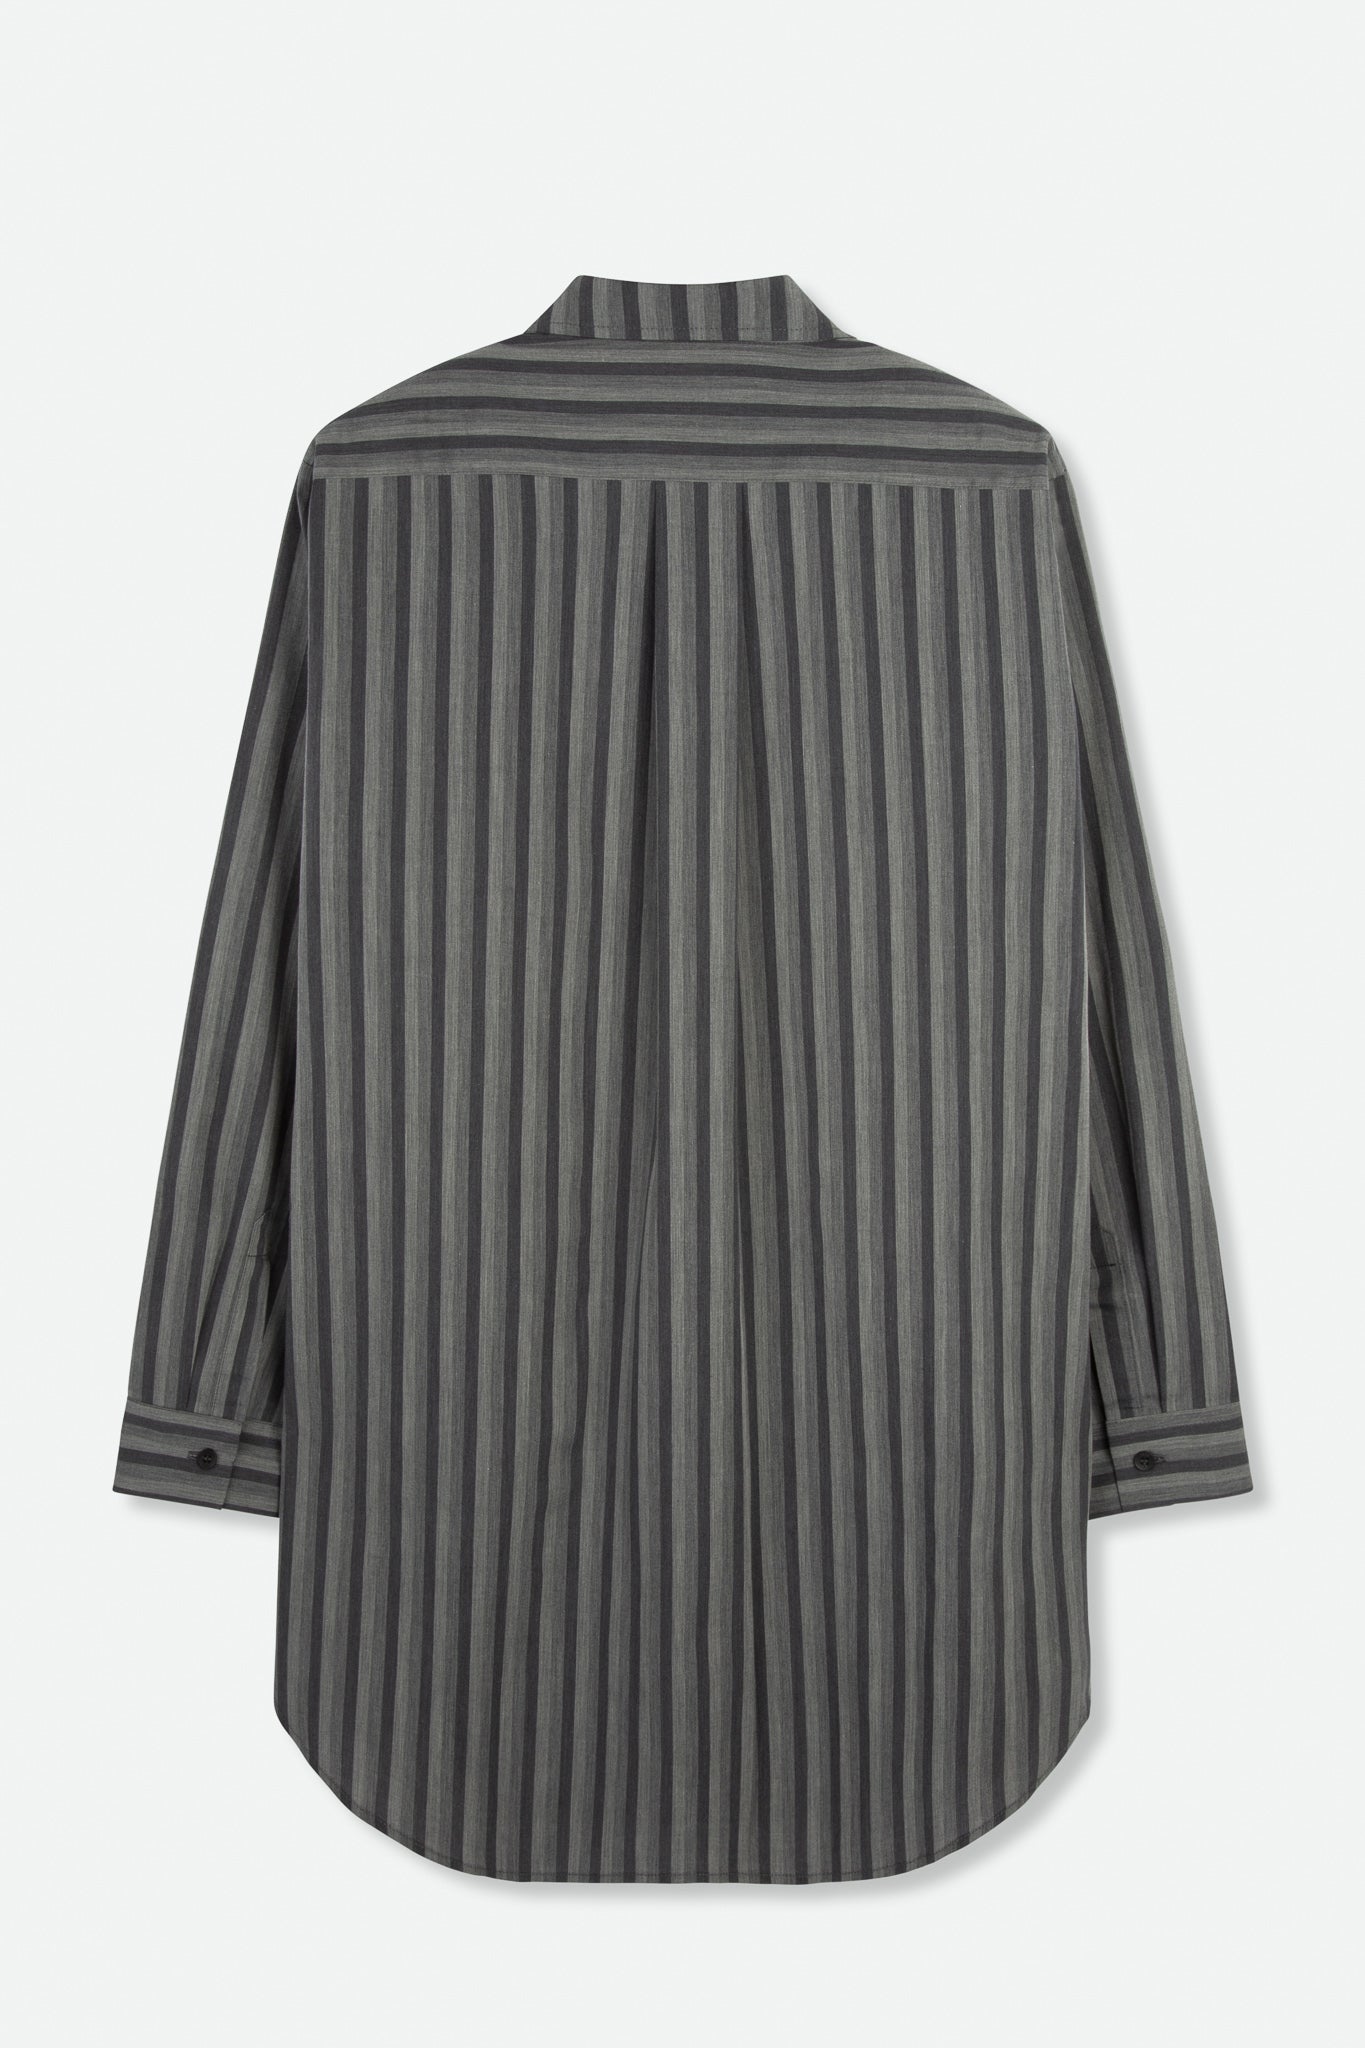 PERFECT SHIRT WITH A LENGTHENED HEM IN ITALIAN COTTON VERTICAL CHARCOAL STRIPE - Jarbo